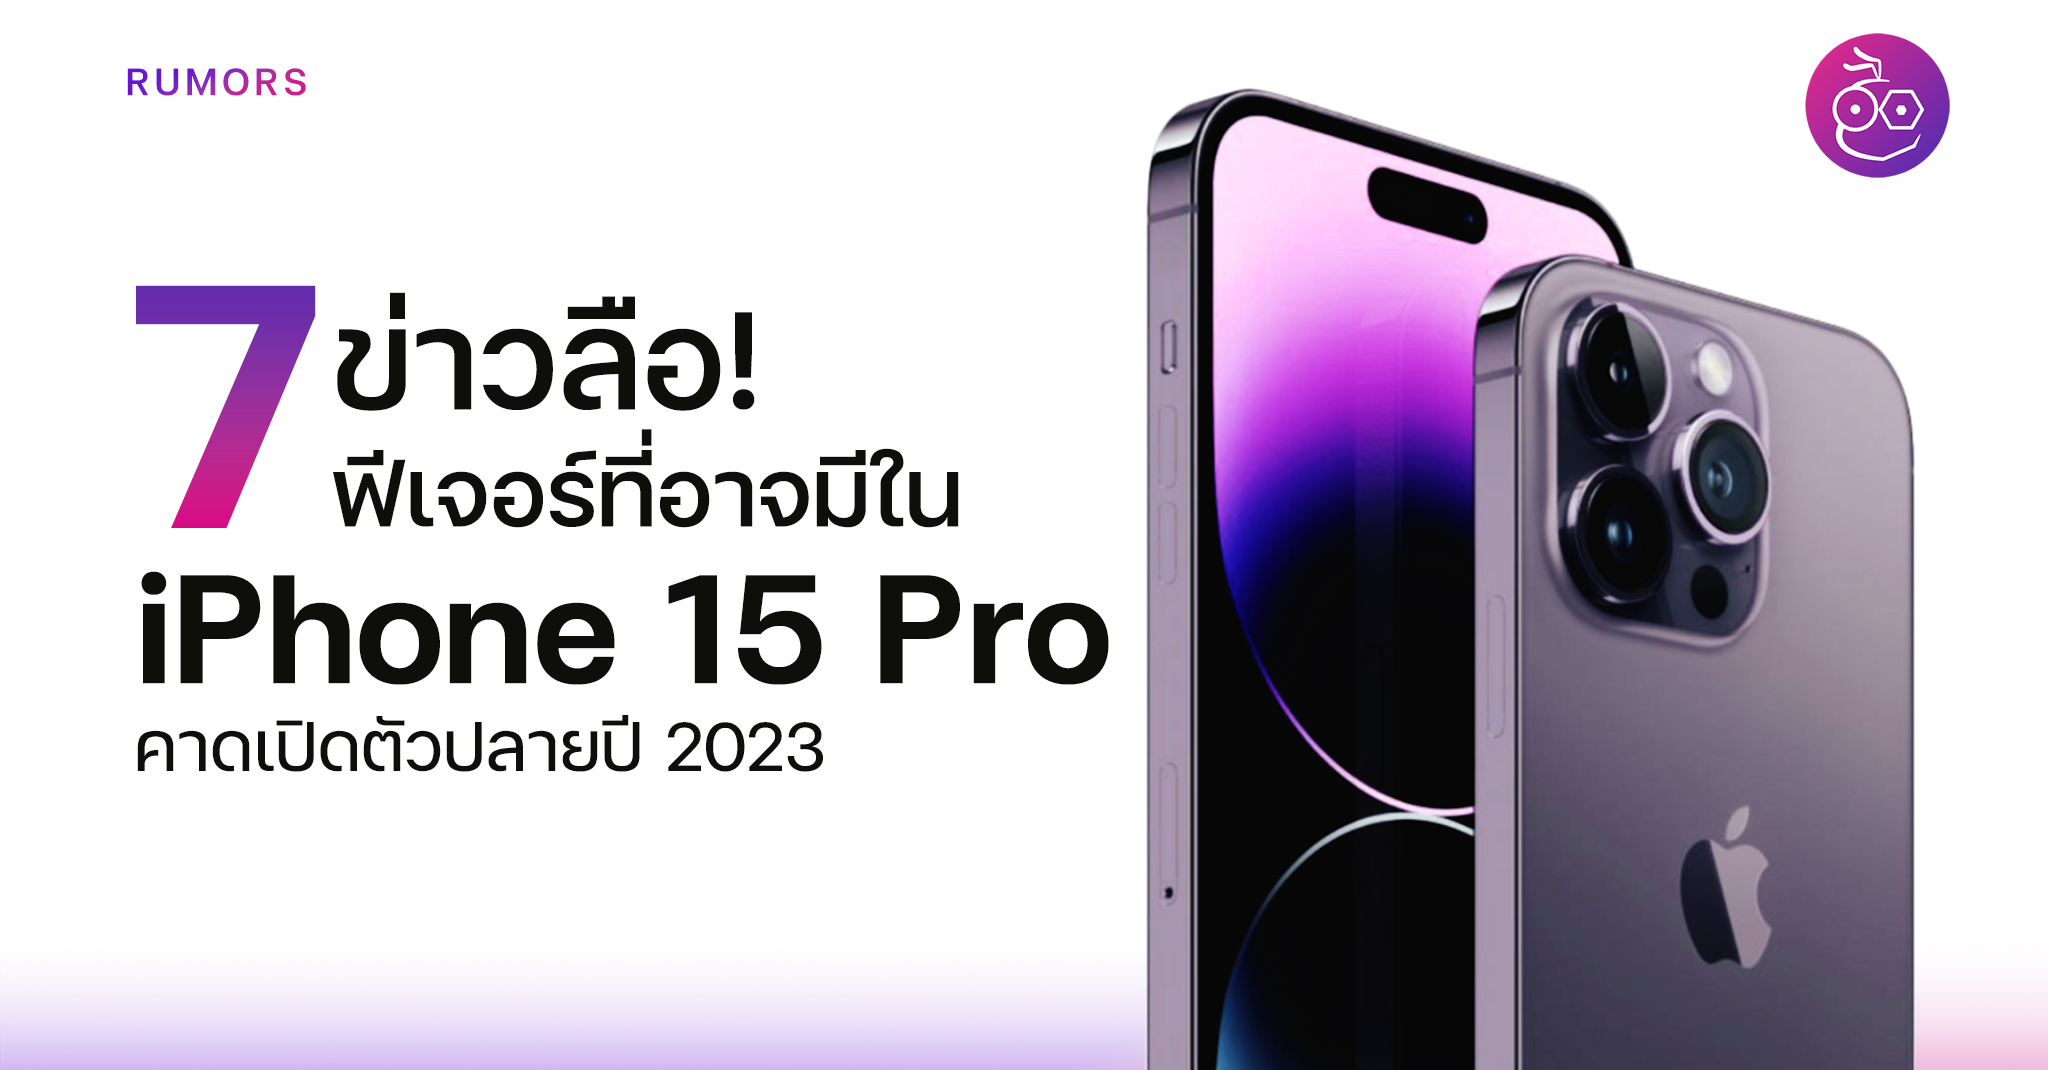 (Rumoured) 7 things in the iPhone 15 Pro, expected to launch late 2023, updated in January